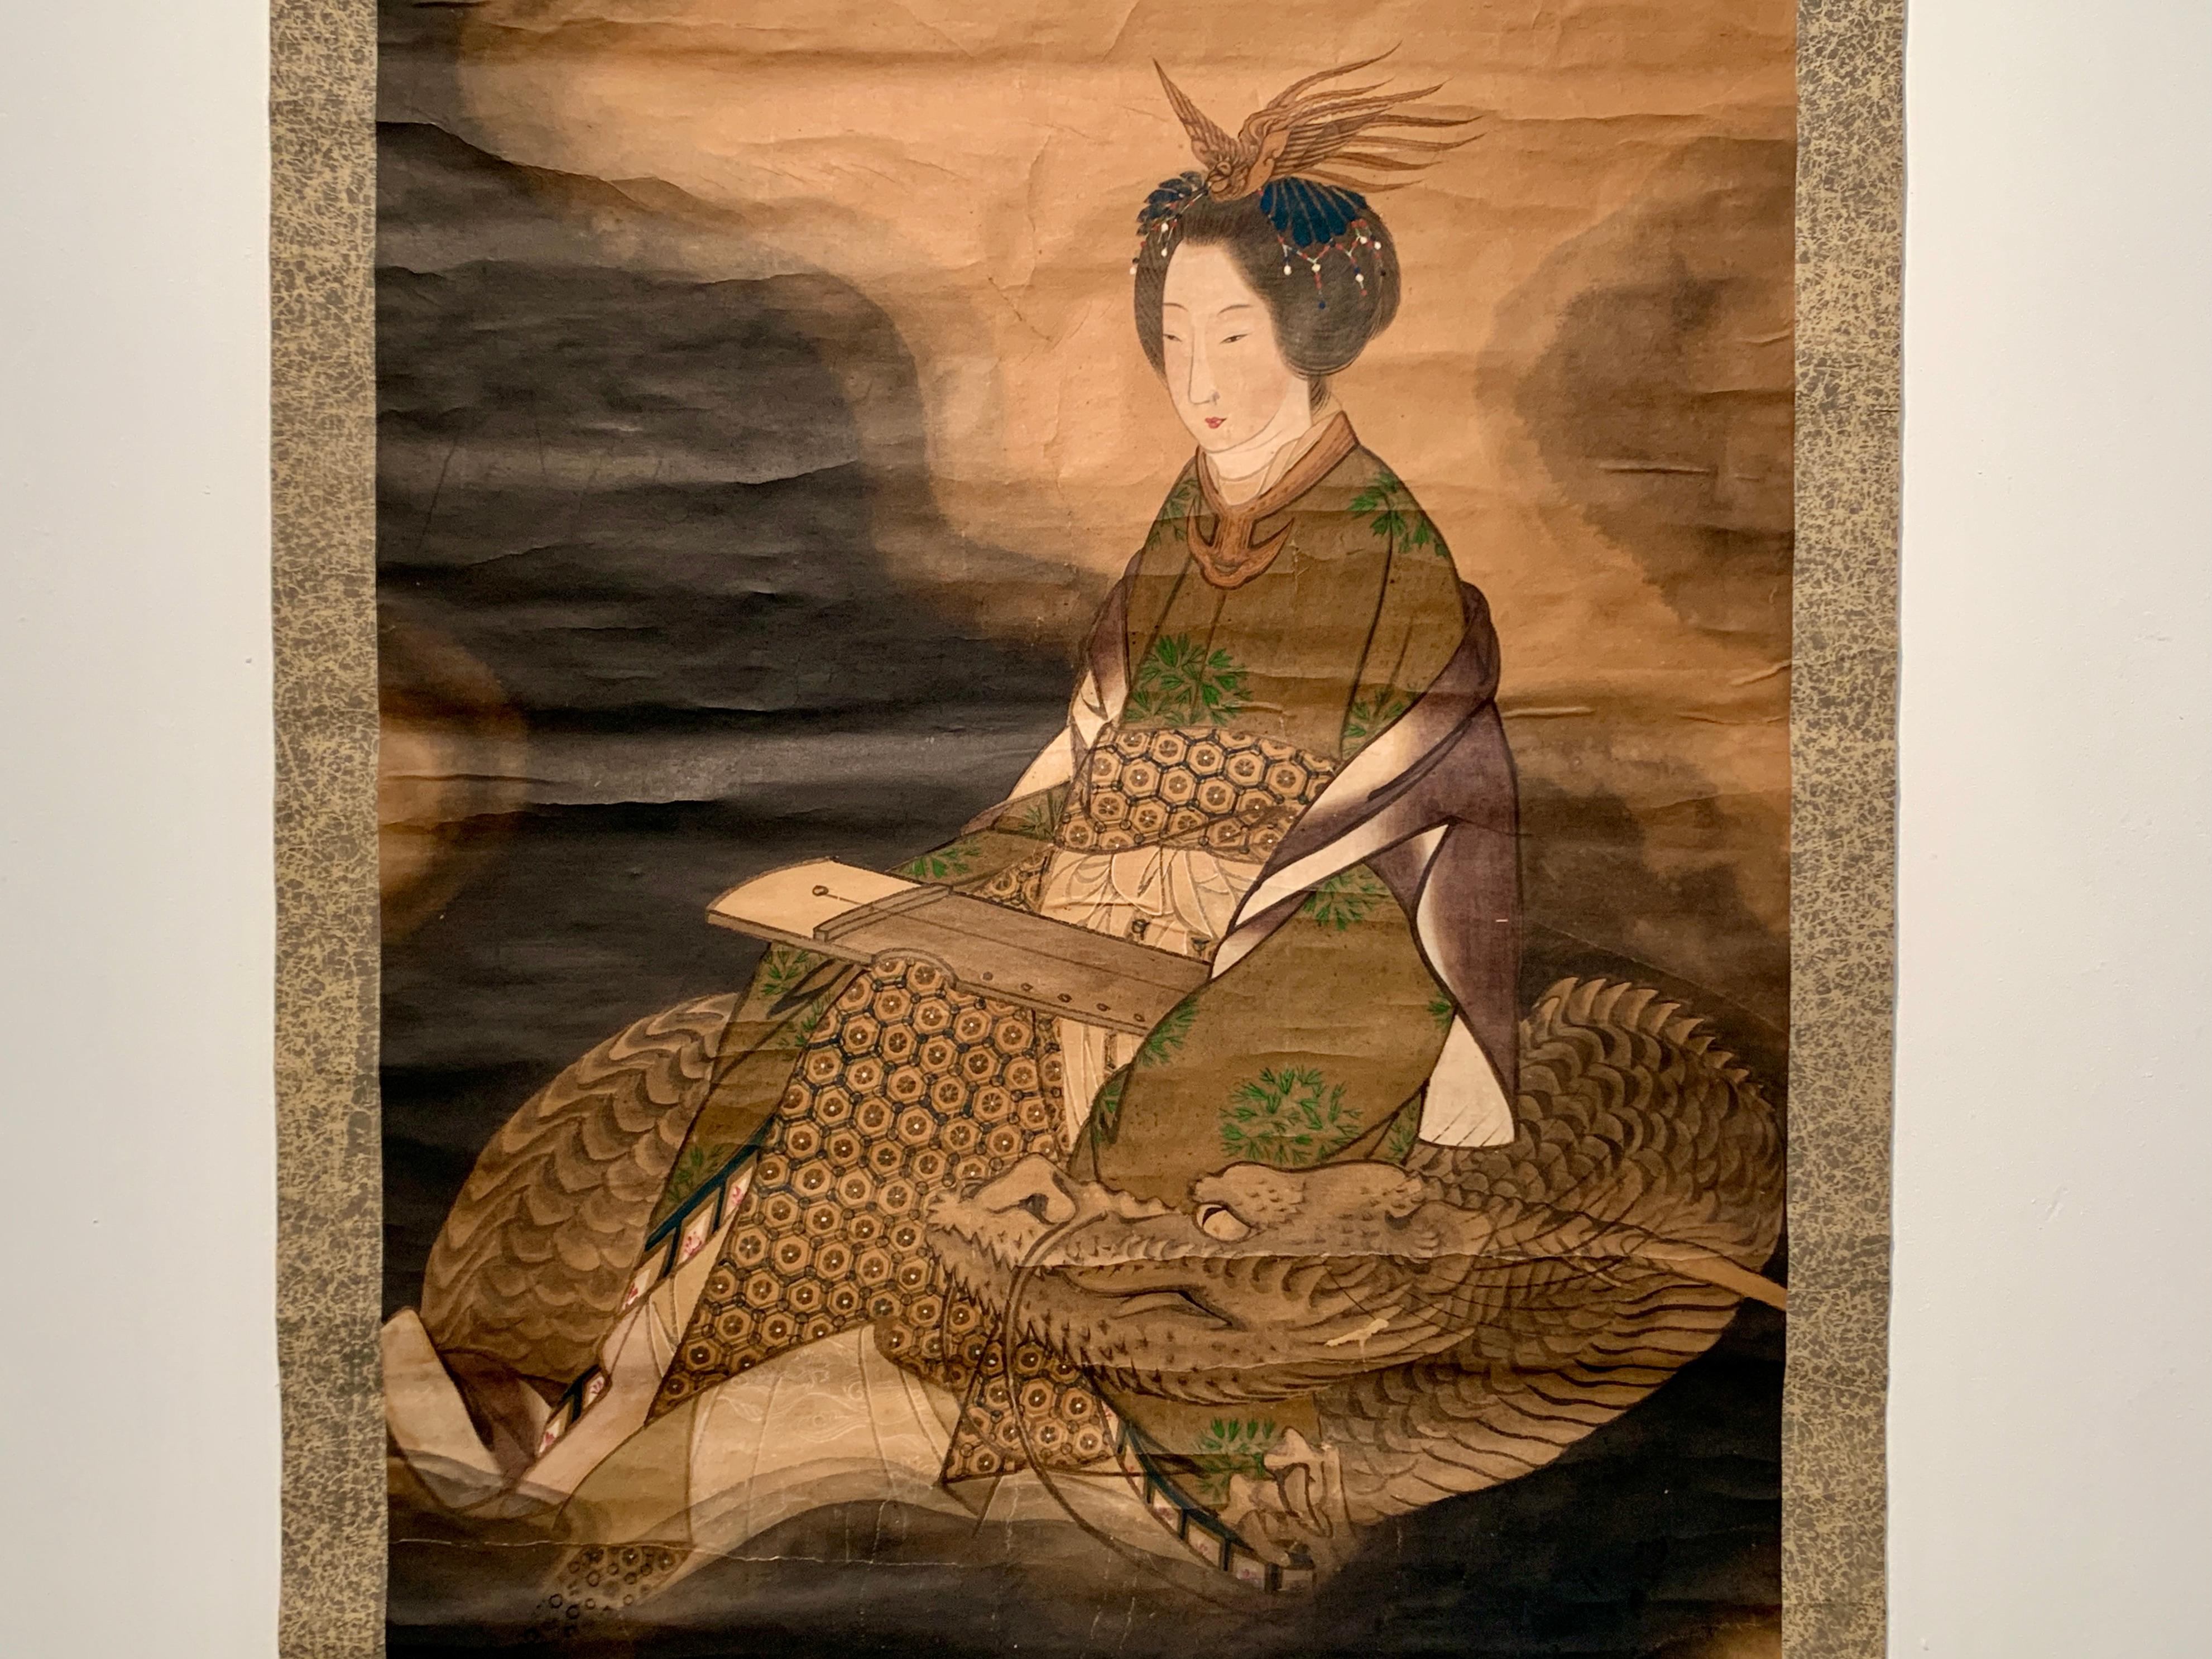 A powerful and brooding Japanese hanging scroll painting of the goddess Benzaiten riding a dragon, ink and color on paper, mounted on paper, with silk brocade, Taisho Period, early 20th century, Japan

This hanging scroll, kakemono or kakejiku, is